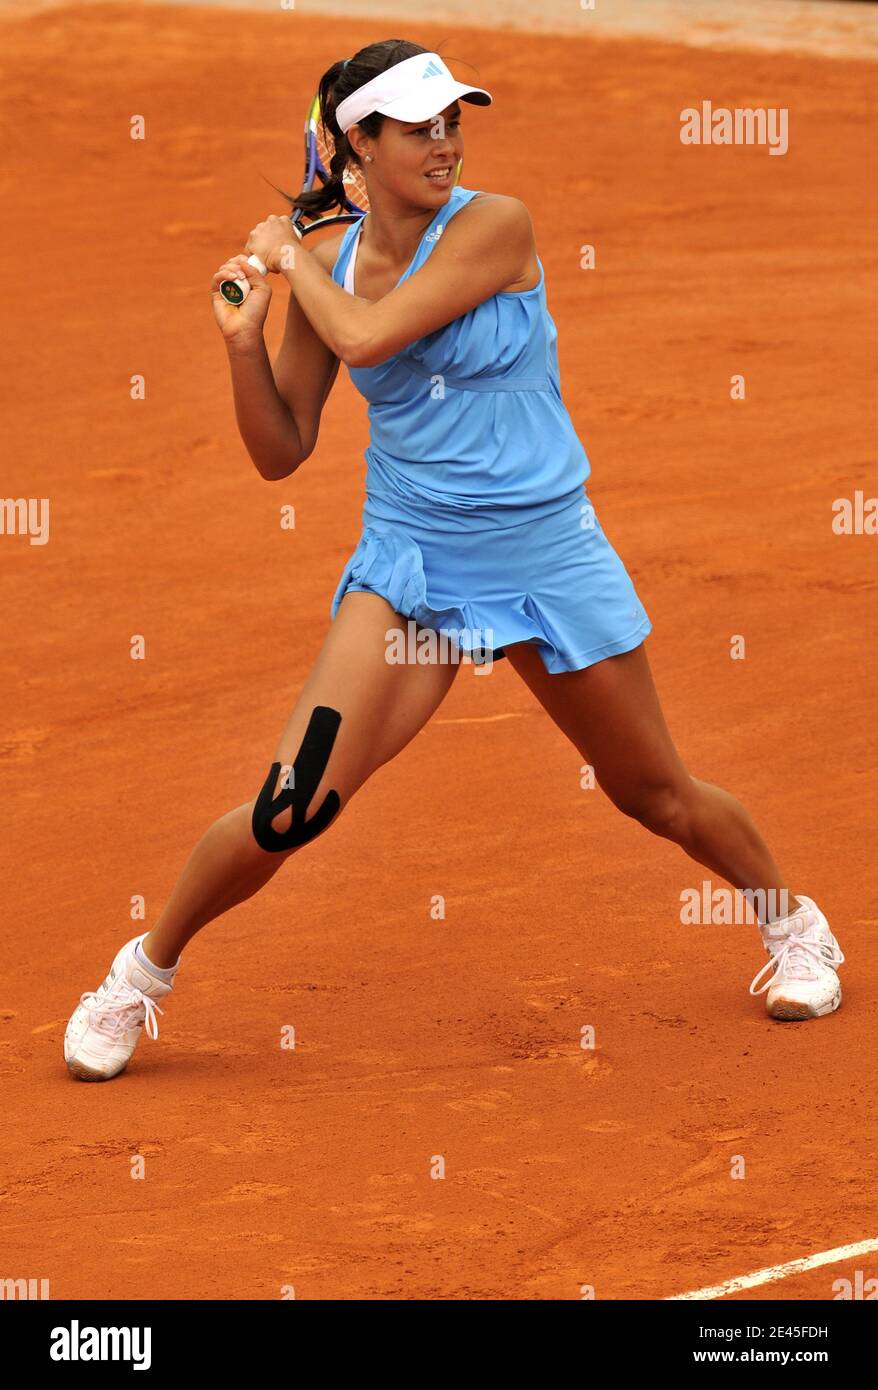 Serbia's Ana Ivanovic defeats, 6-1, 6-2, Thailand's Tamarine Tanasugarn in their second round at the French Open tennis at the Roland Garros stadium in Paris, France on May 27, 2009. Photo by Christophe Guibbaud/Cameleon/ABACAPRESS.COM Stock Photo